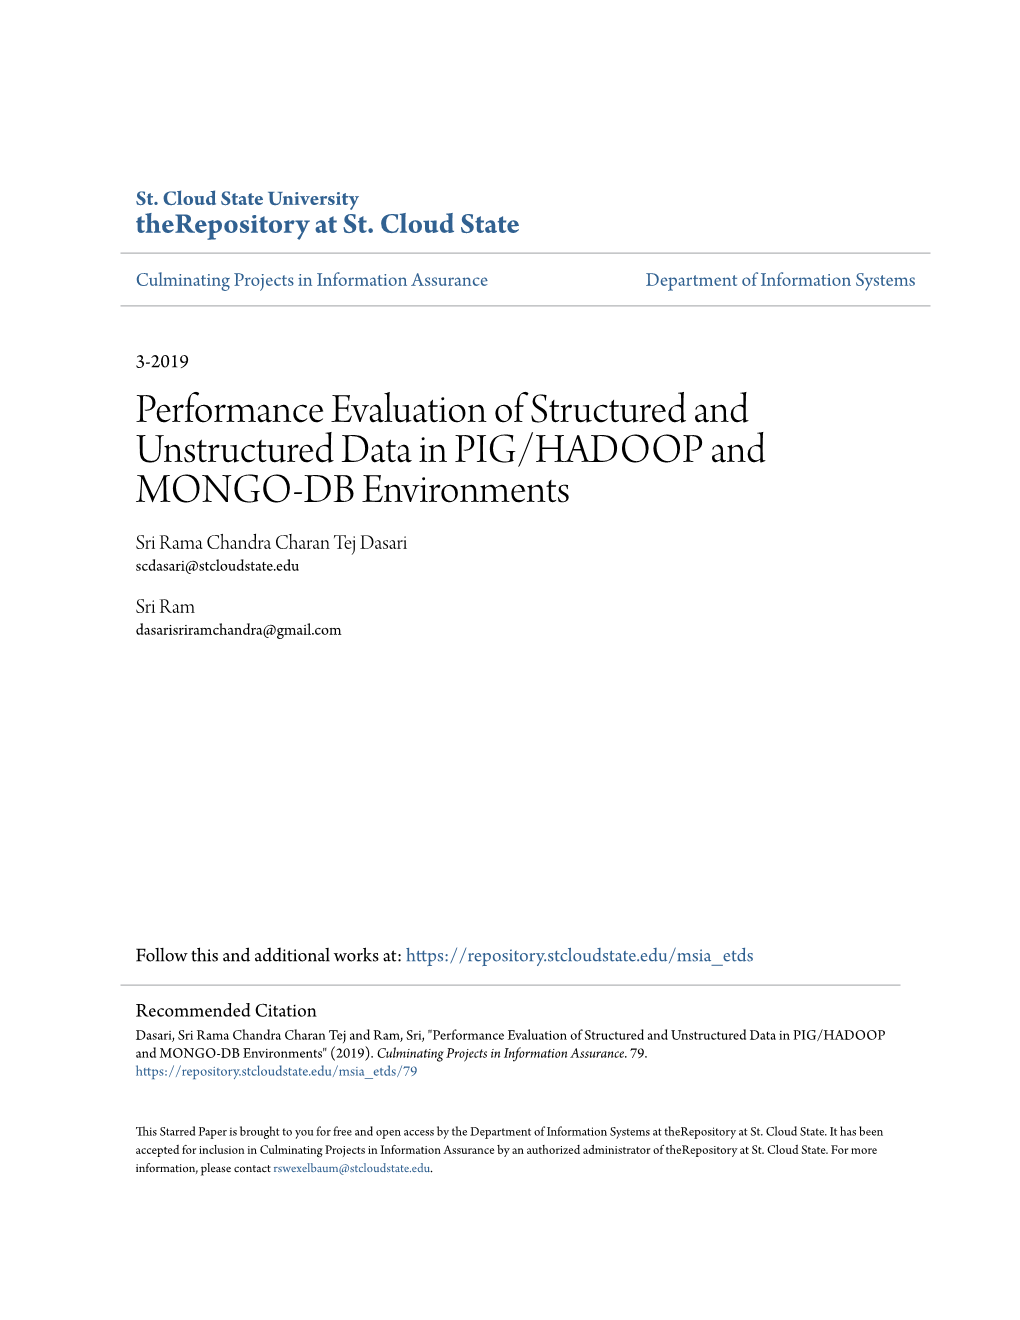 Performance Evaluation of Structured and Unstructured Data in PIG/HADOOP and MONGO-DB Environments Sri Rama Chandra Charan Tej Dasari Scdasari@Stcloudstate.Edu